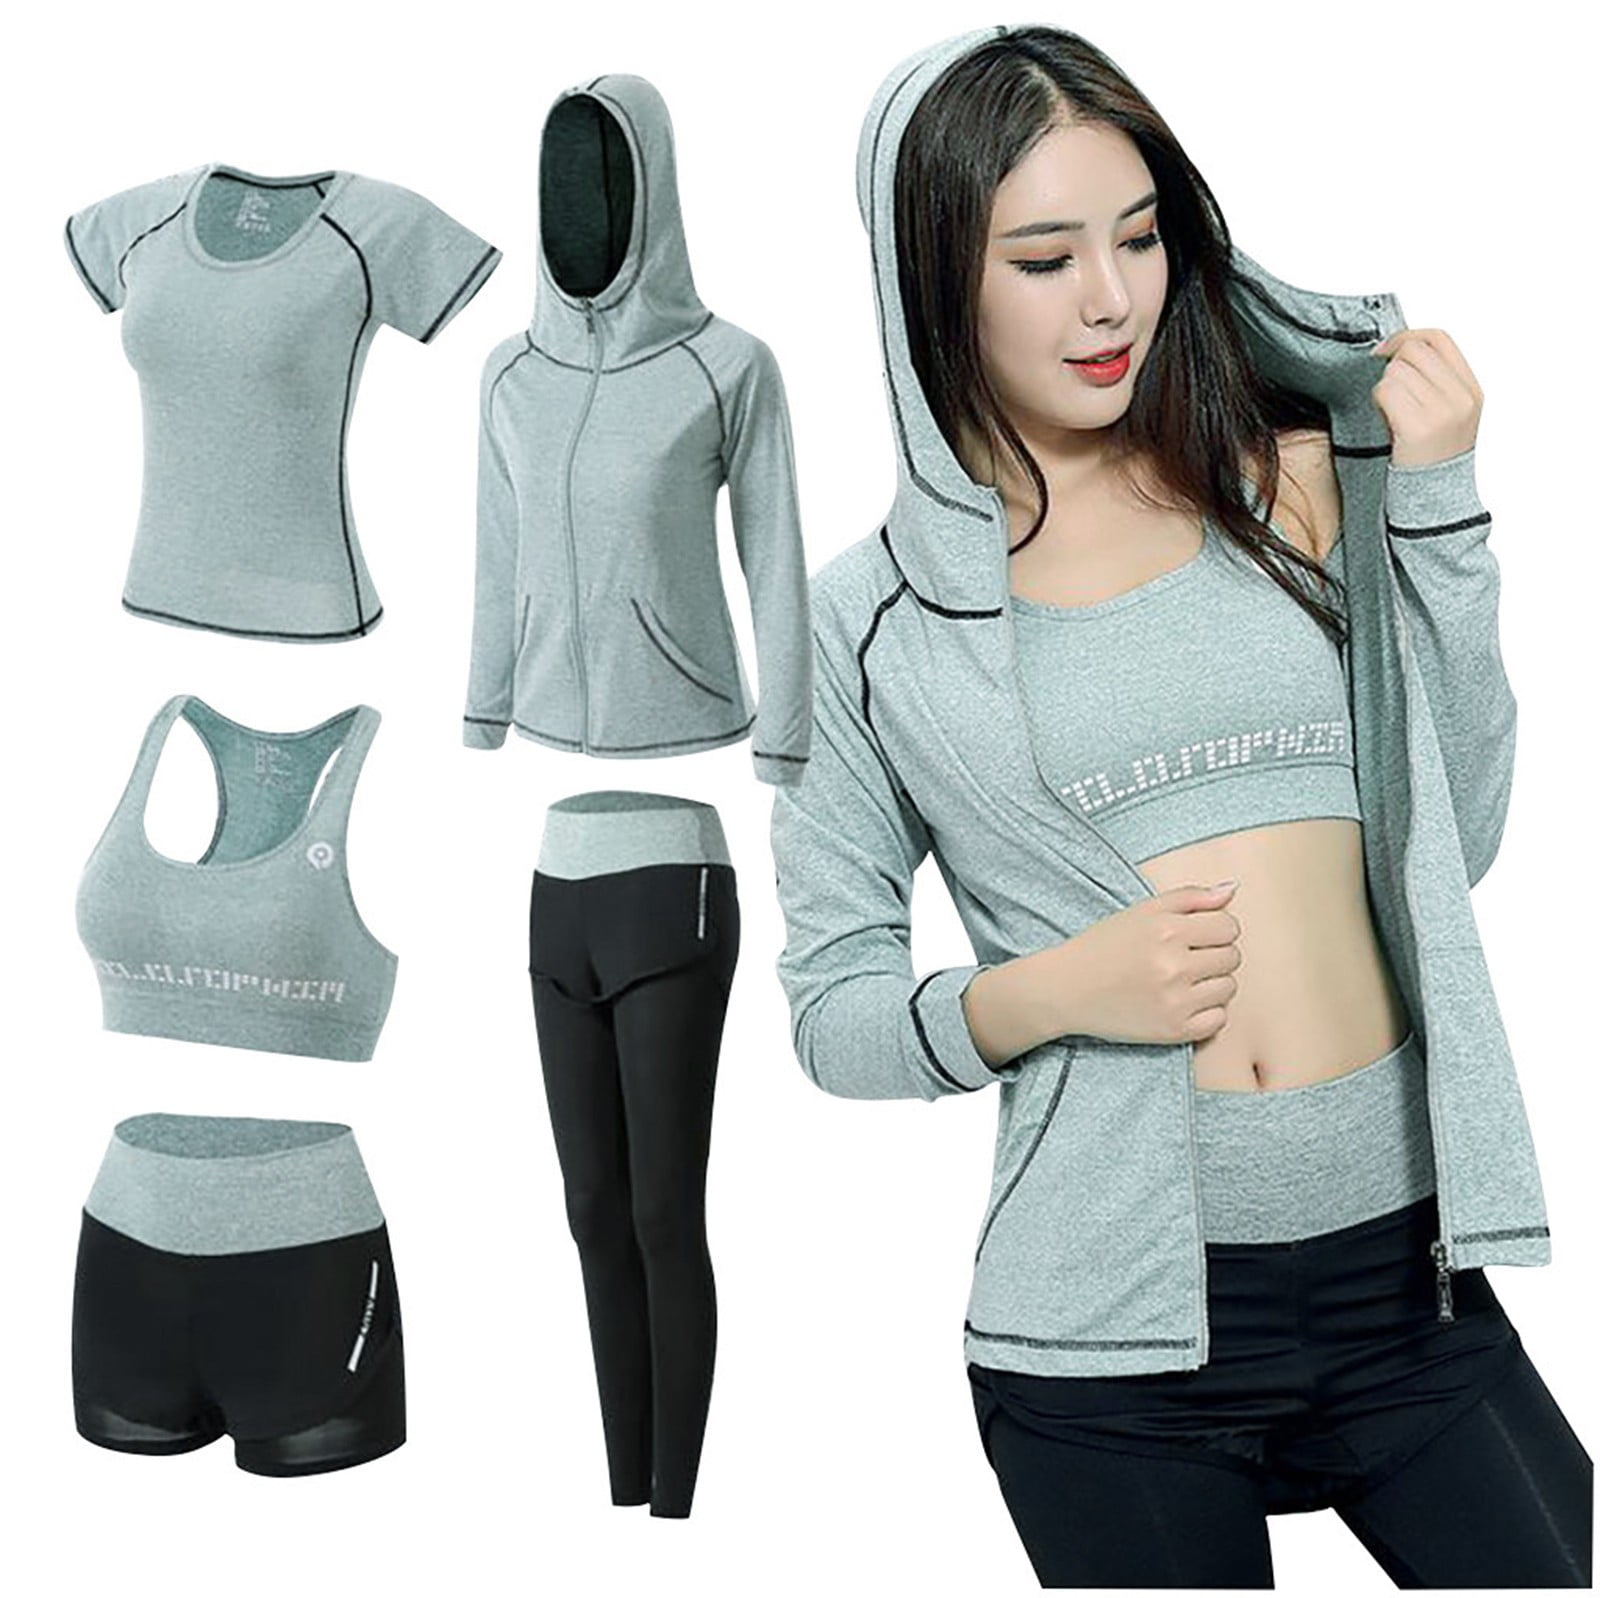 Casual Outfits For Both Leisure Or The Gym - Street to Gym Wear